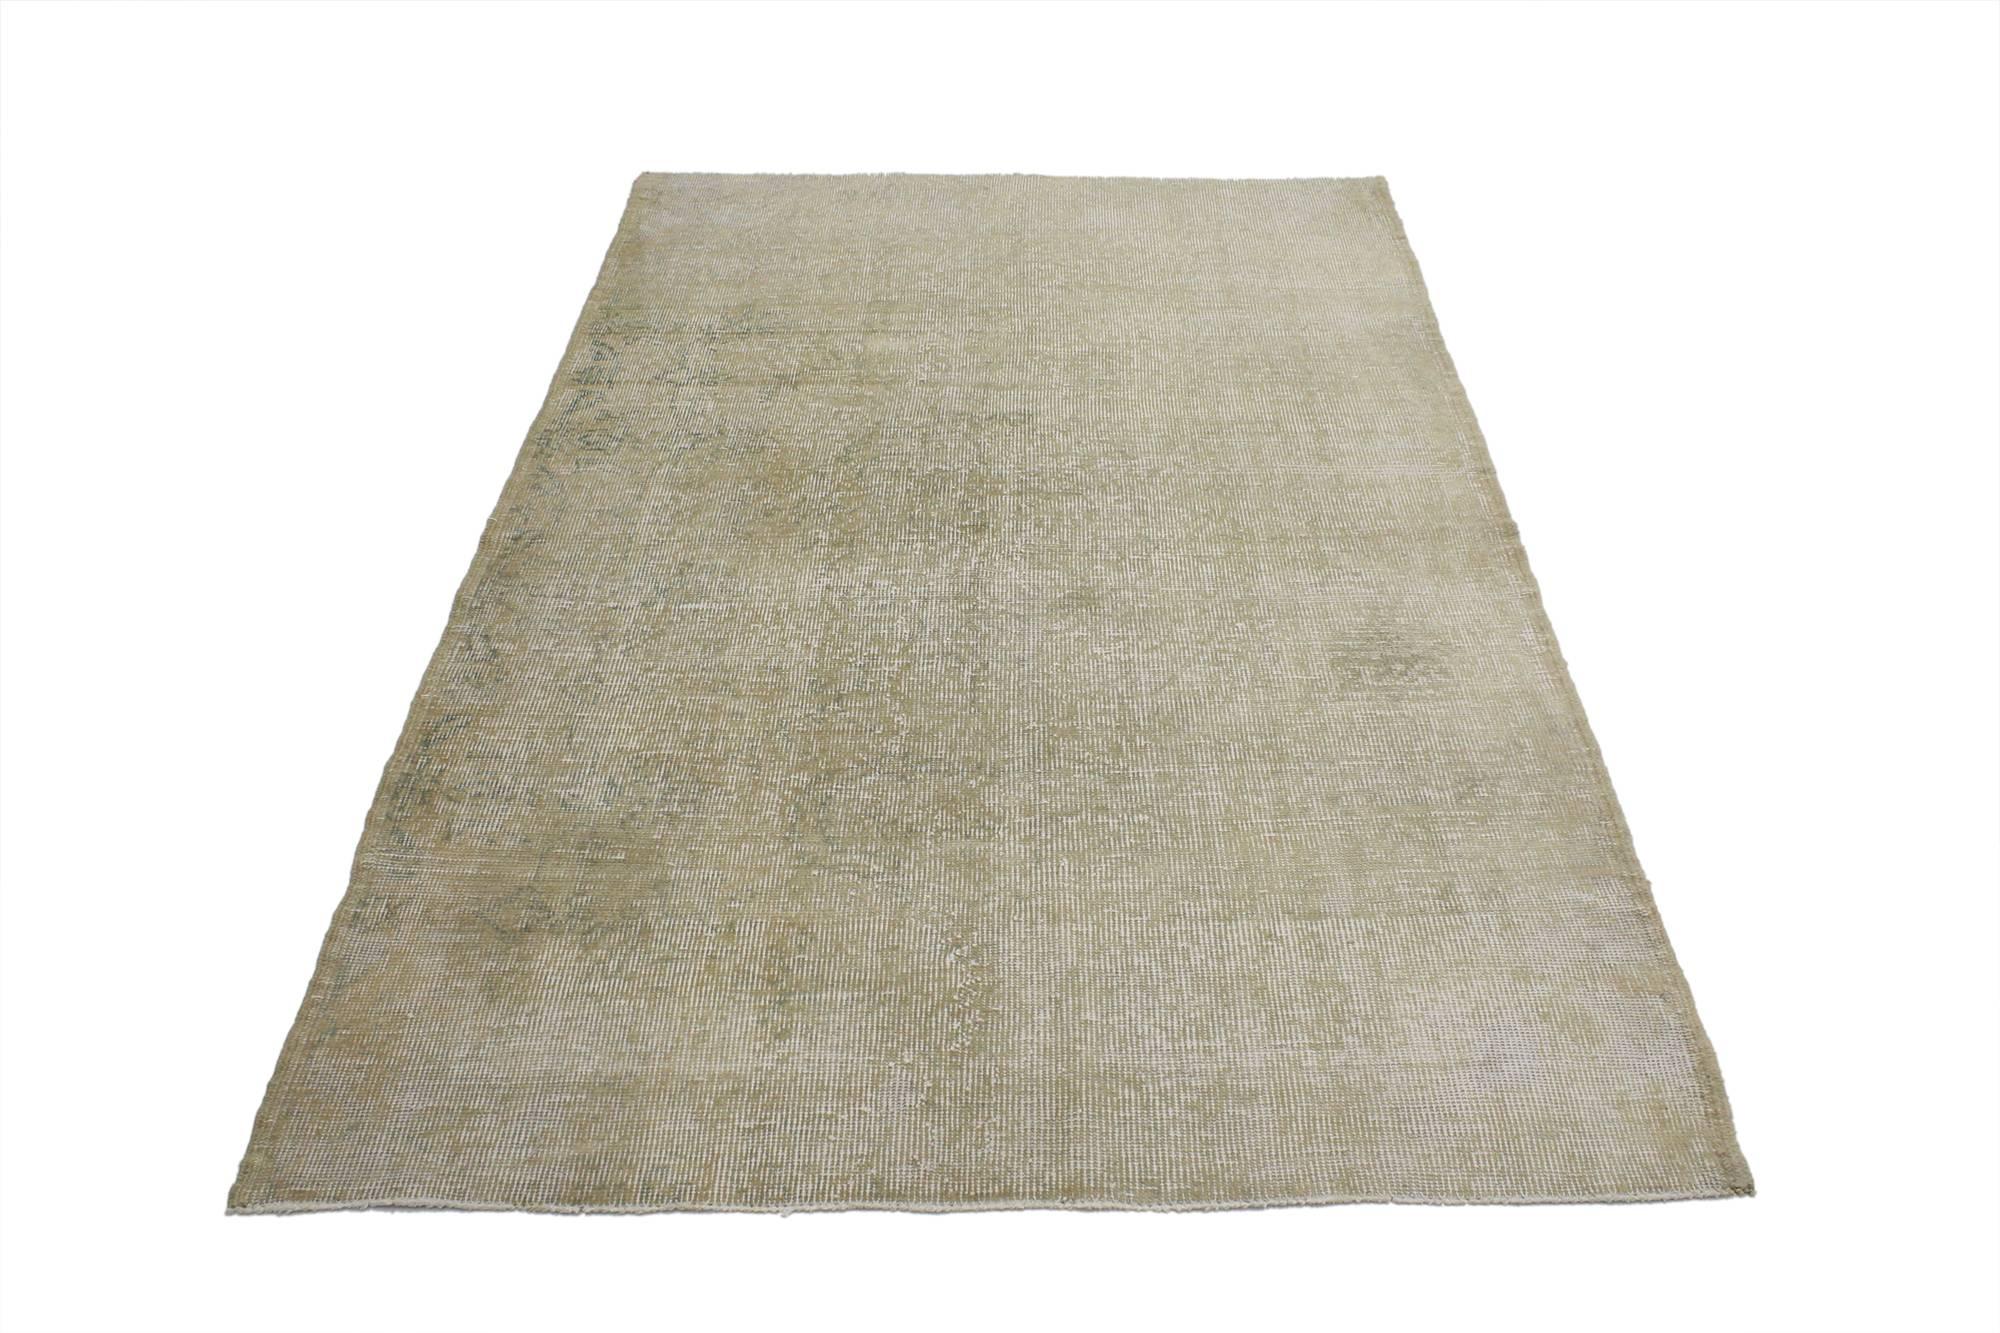 51982, distressed vintage Turkish Sivas rug with Cotswold Cottage style 03'11 x 06'02. With its soft, subtle hues and cozy simplicity, this hand knotted wool distressed vintage Turkish Sivas rug charms with ease and beautifully embodies Cotswold